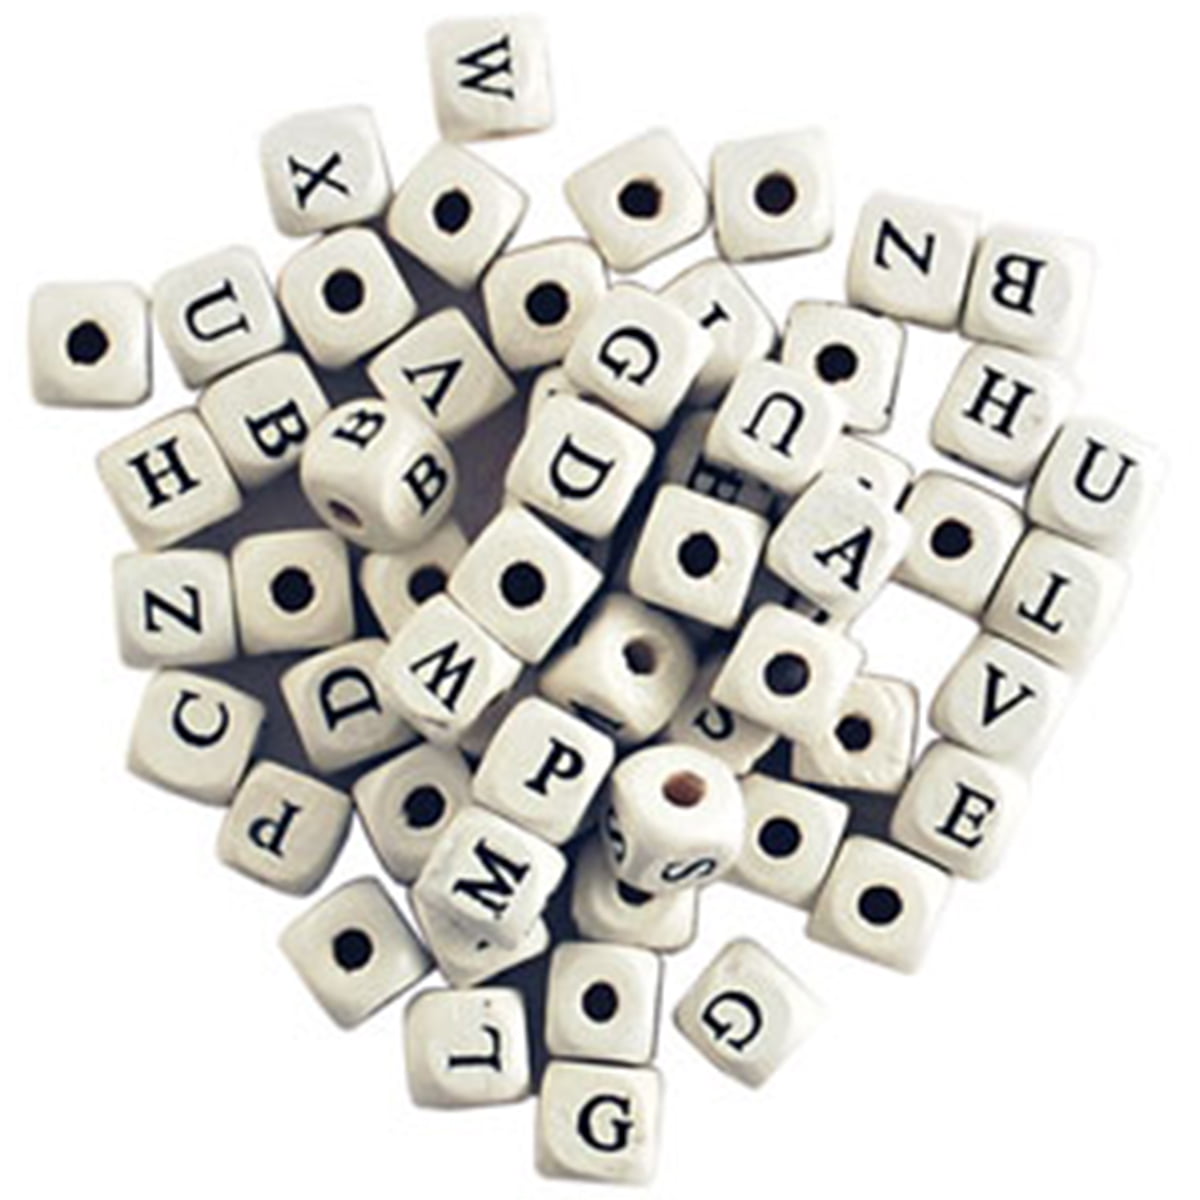  Hygloss Products ABC Wood Beads - Bright Colored Wooden  Alphabet Craft Letter Beads - 10mm, 225 Pack (8906)